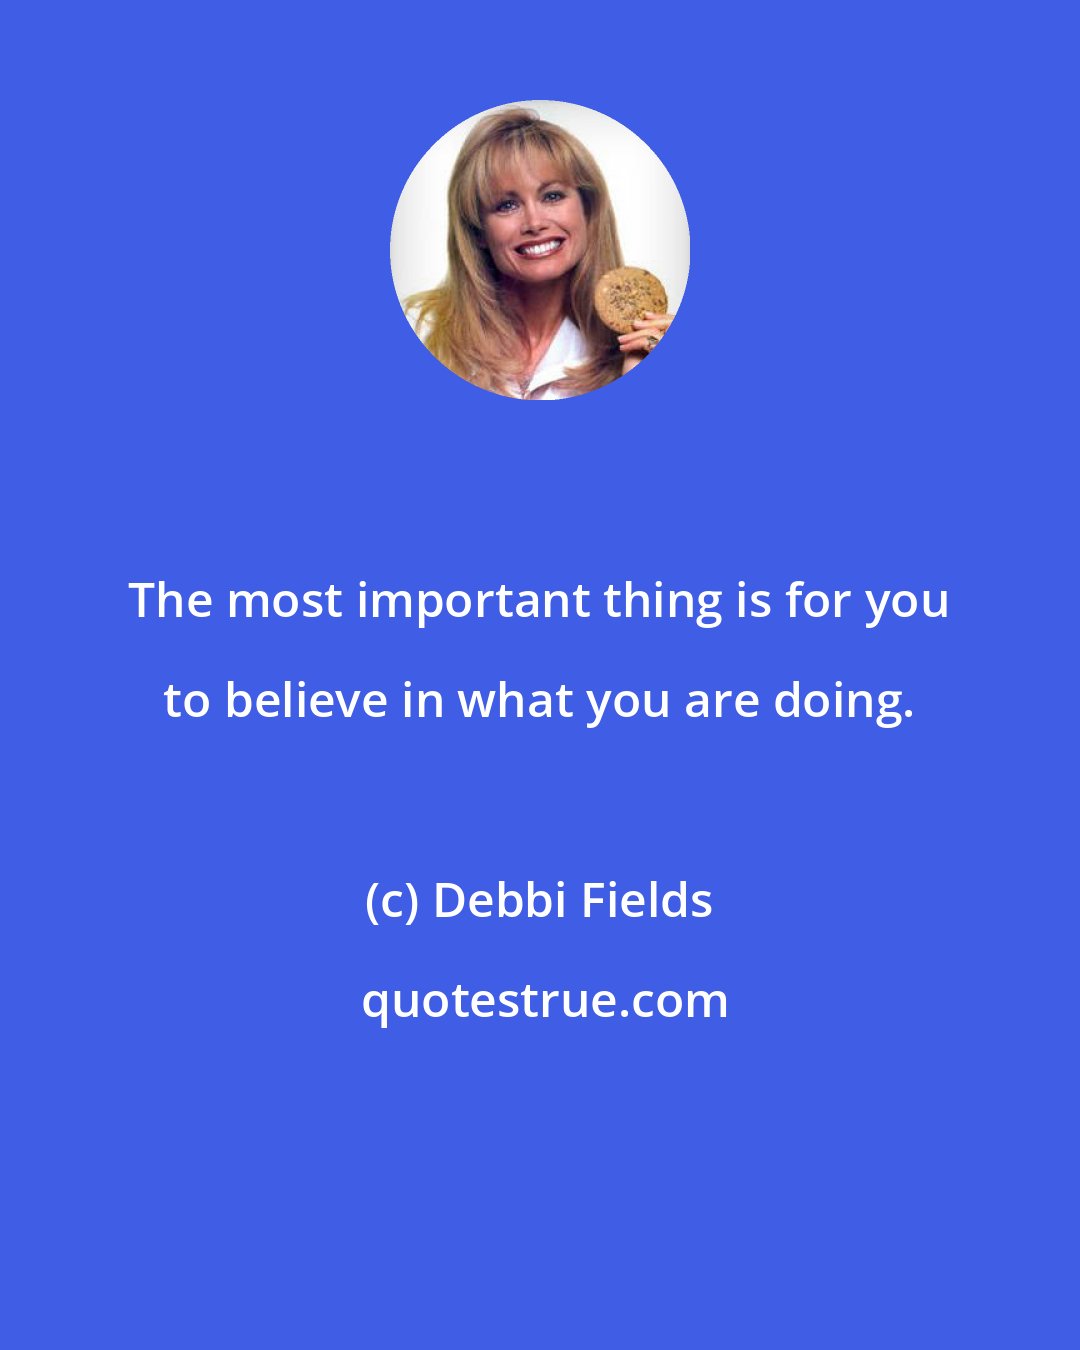 Debbi Fields: The most important thing is for you to believe in what you are doing.